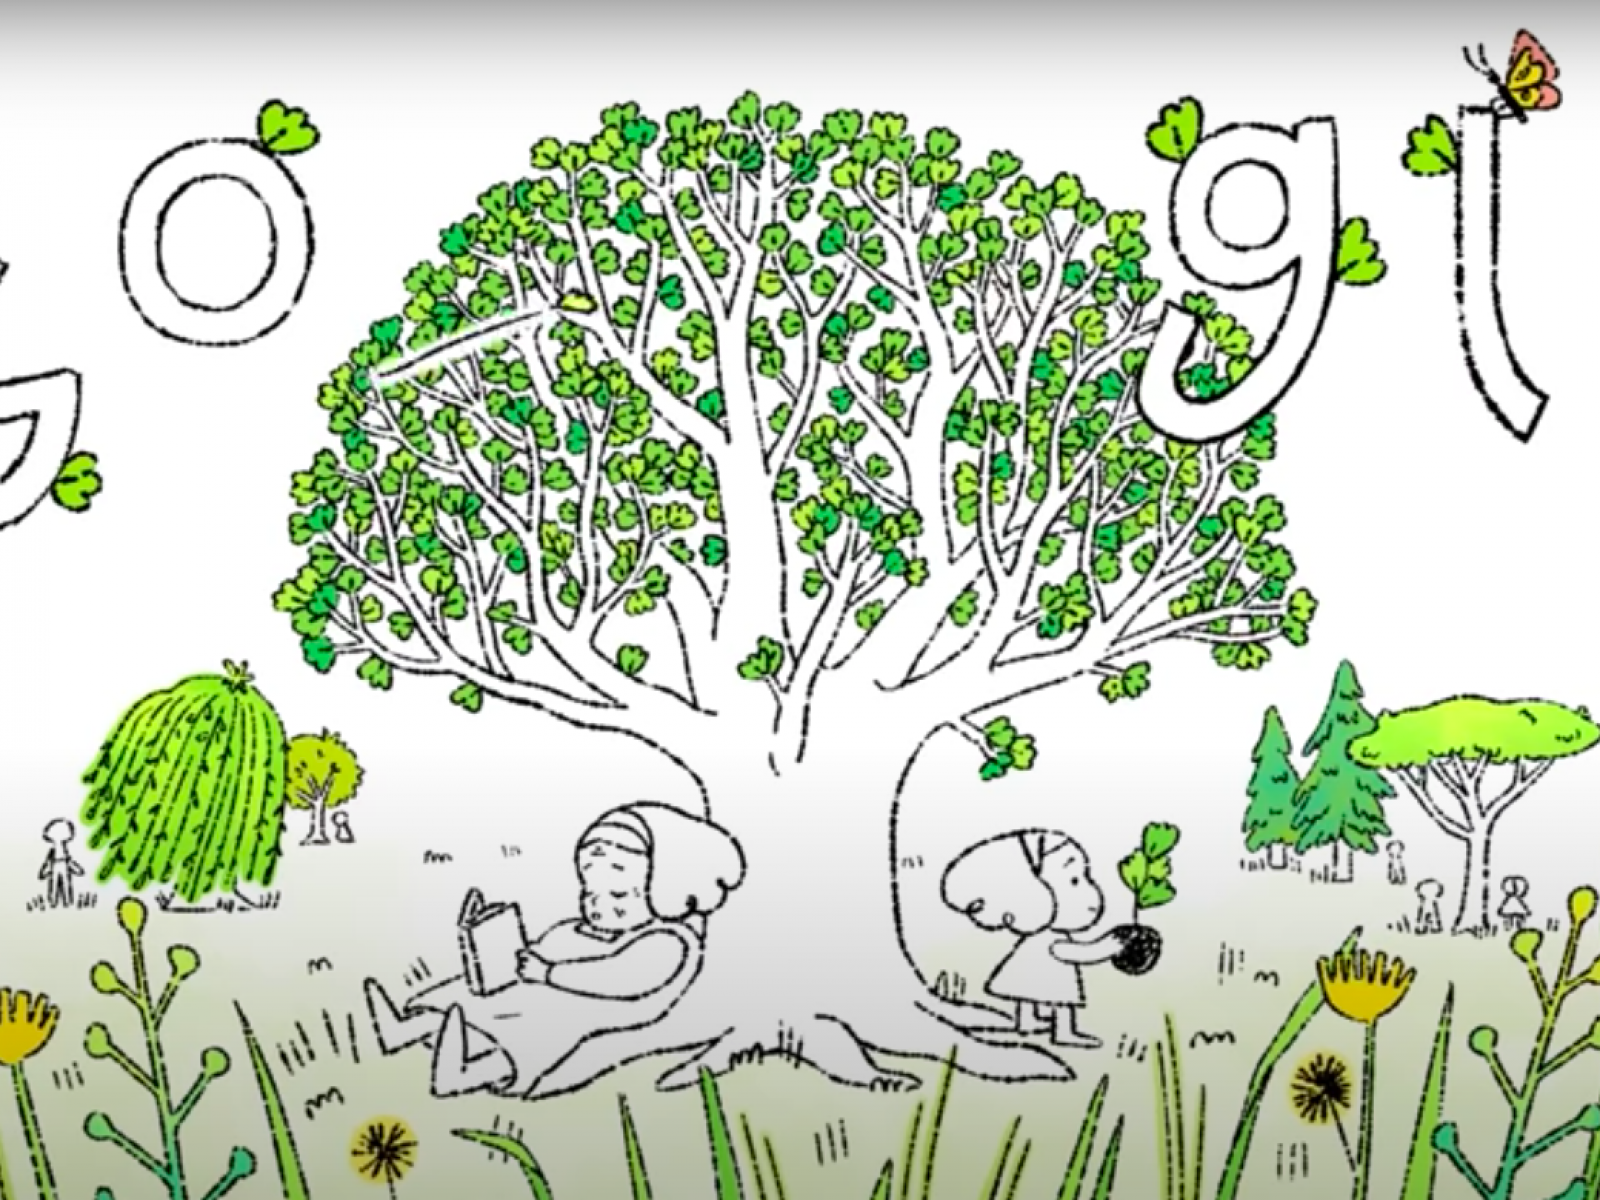 Earth Day 2021 Google Doodle Animation Shows How 'One Small Act' Can Save  Planet